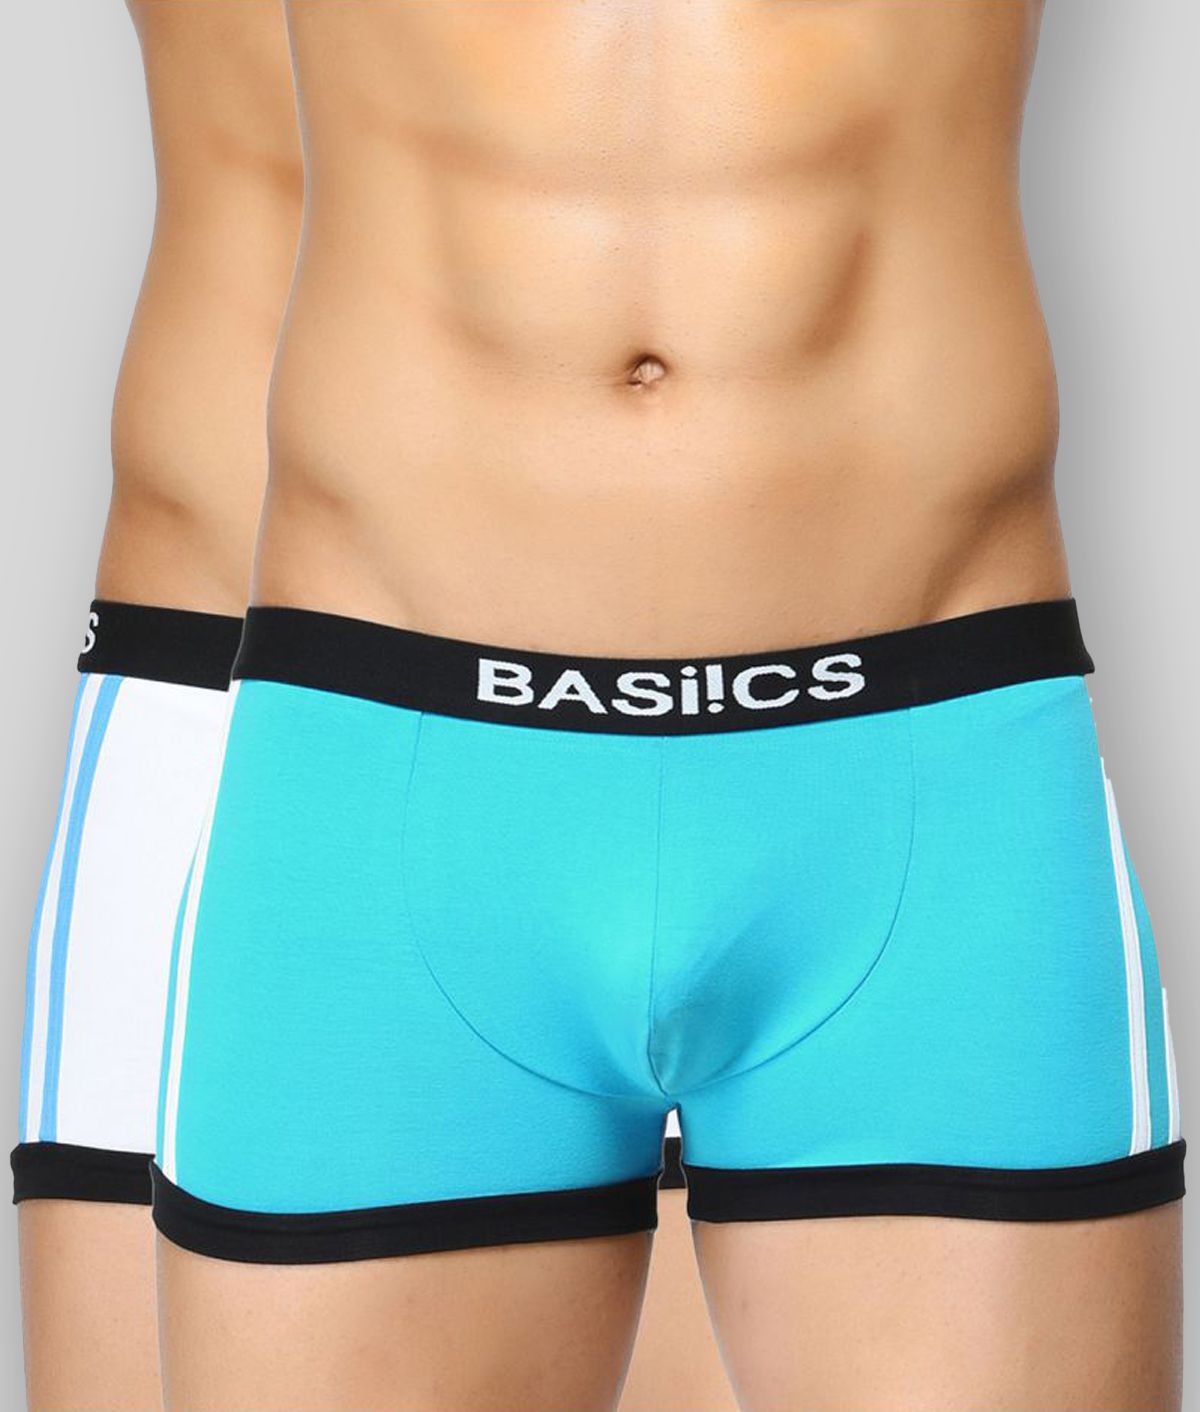     			BASIICS By La Intimo - Multicolor Cotton Men's Trunks ( Pack of 2 )